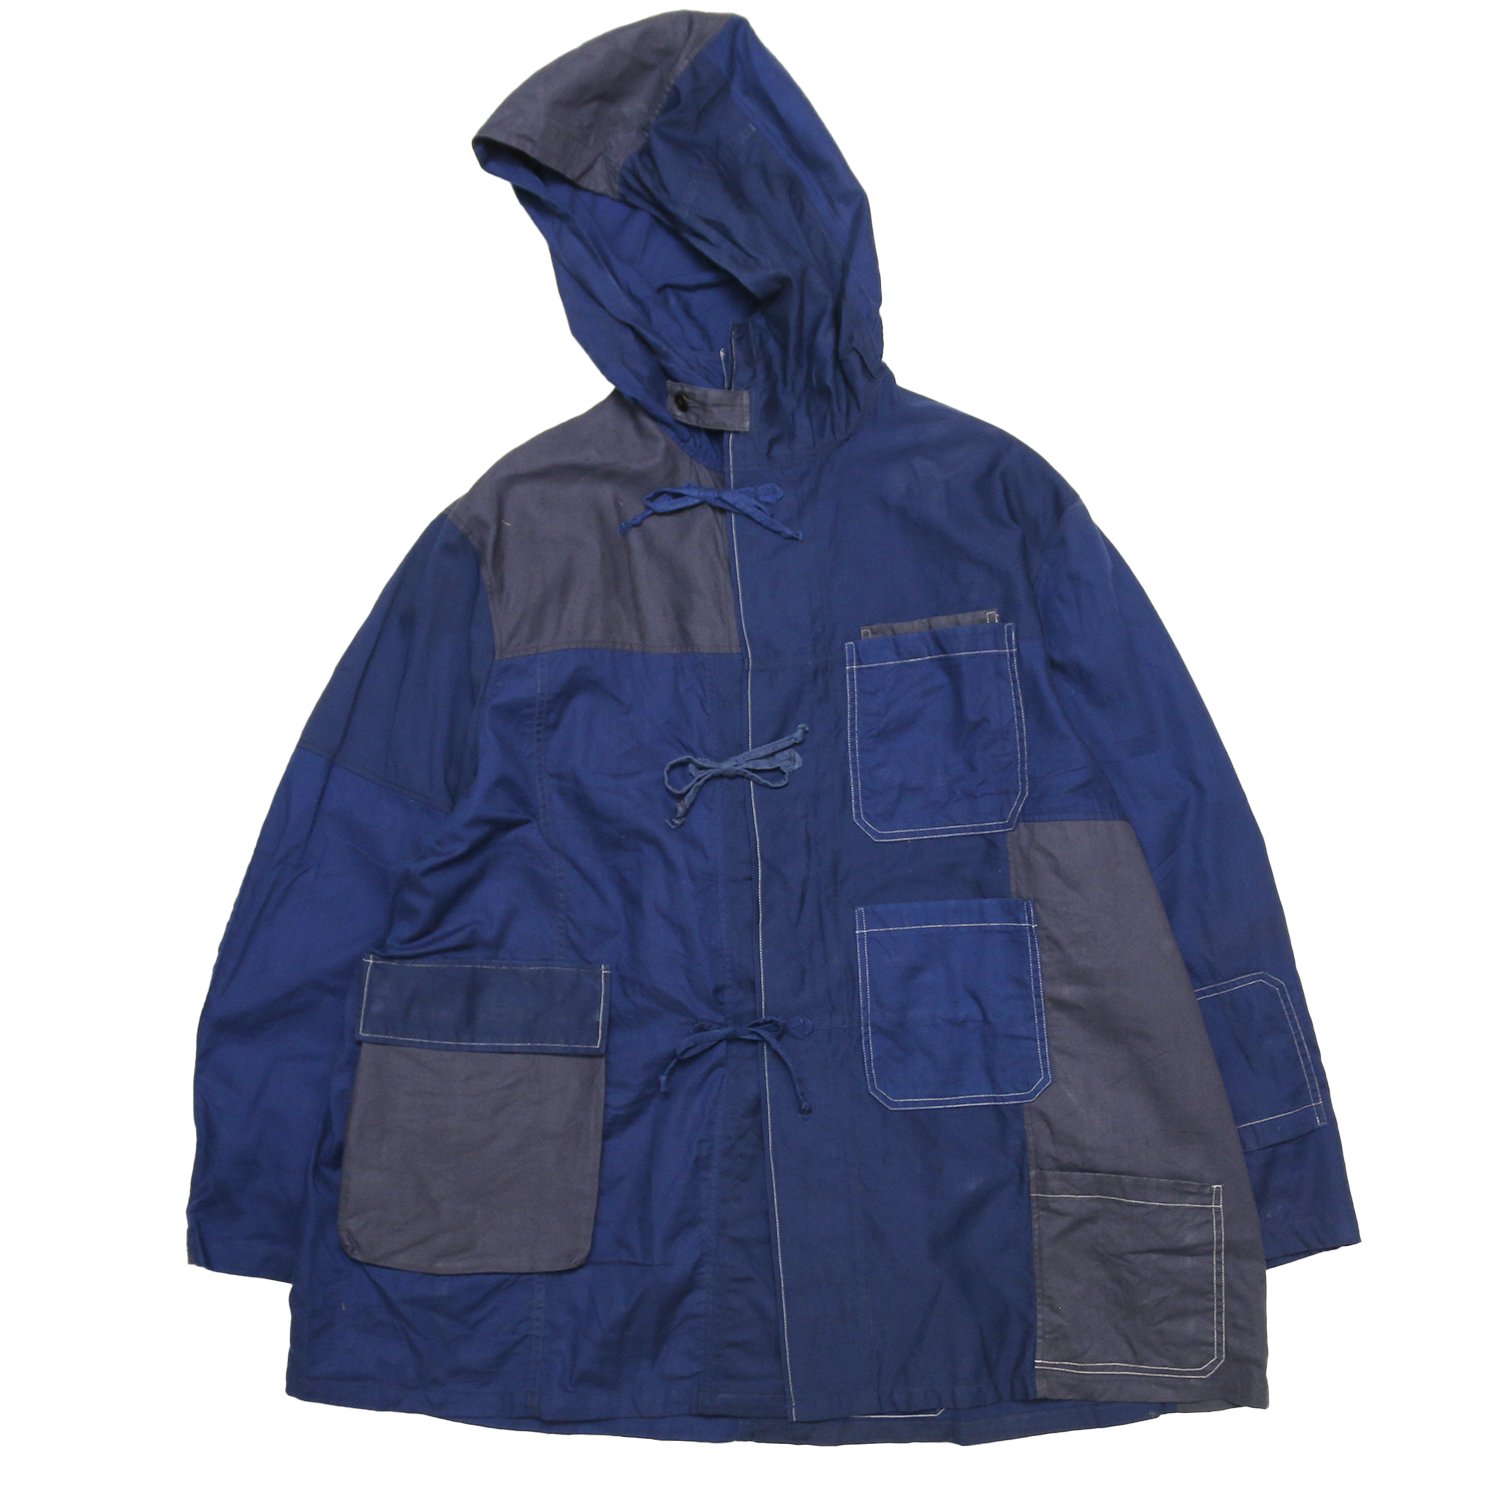 <img class='new_mark_img1' src='https://img.shop-pro.jp/img/new/icons8.gif' style='border:none;display:inline;margin:0px;padding:0px;width:auto;' />Remake by Yi / Parka (Vintage workwear)
